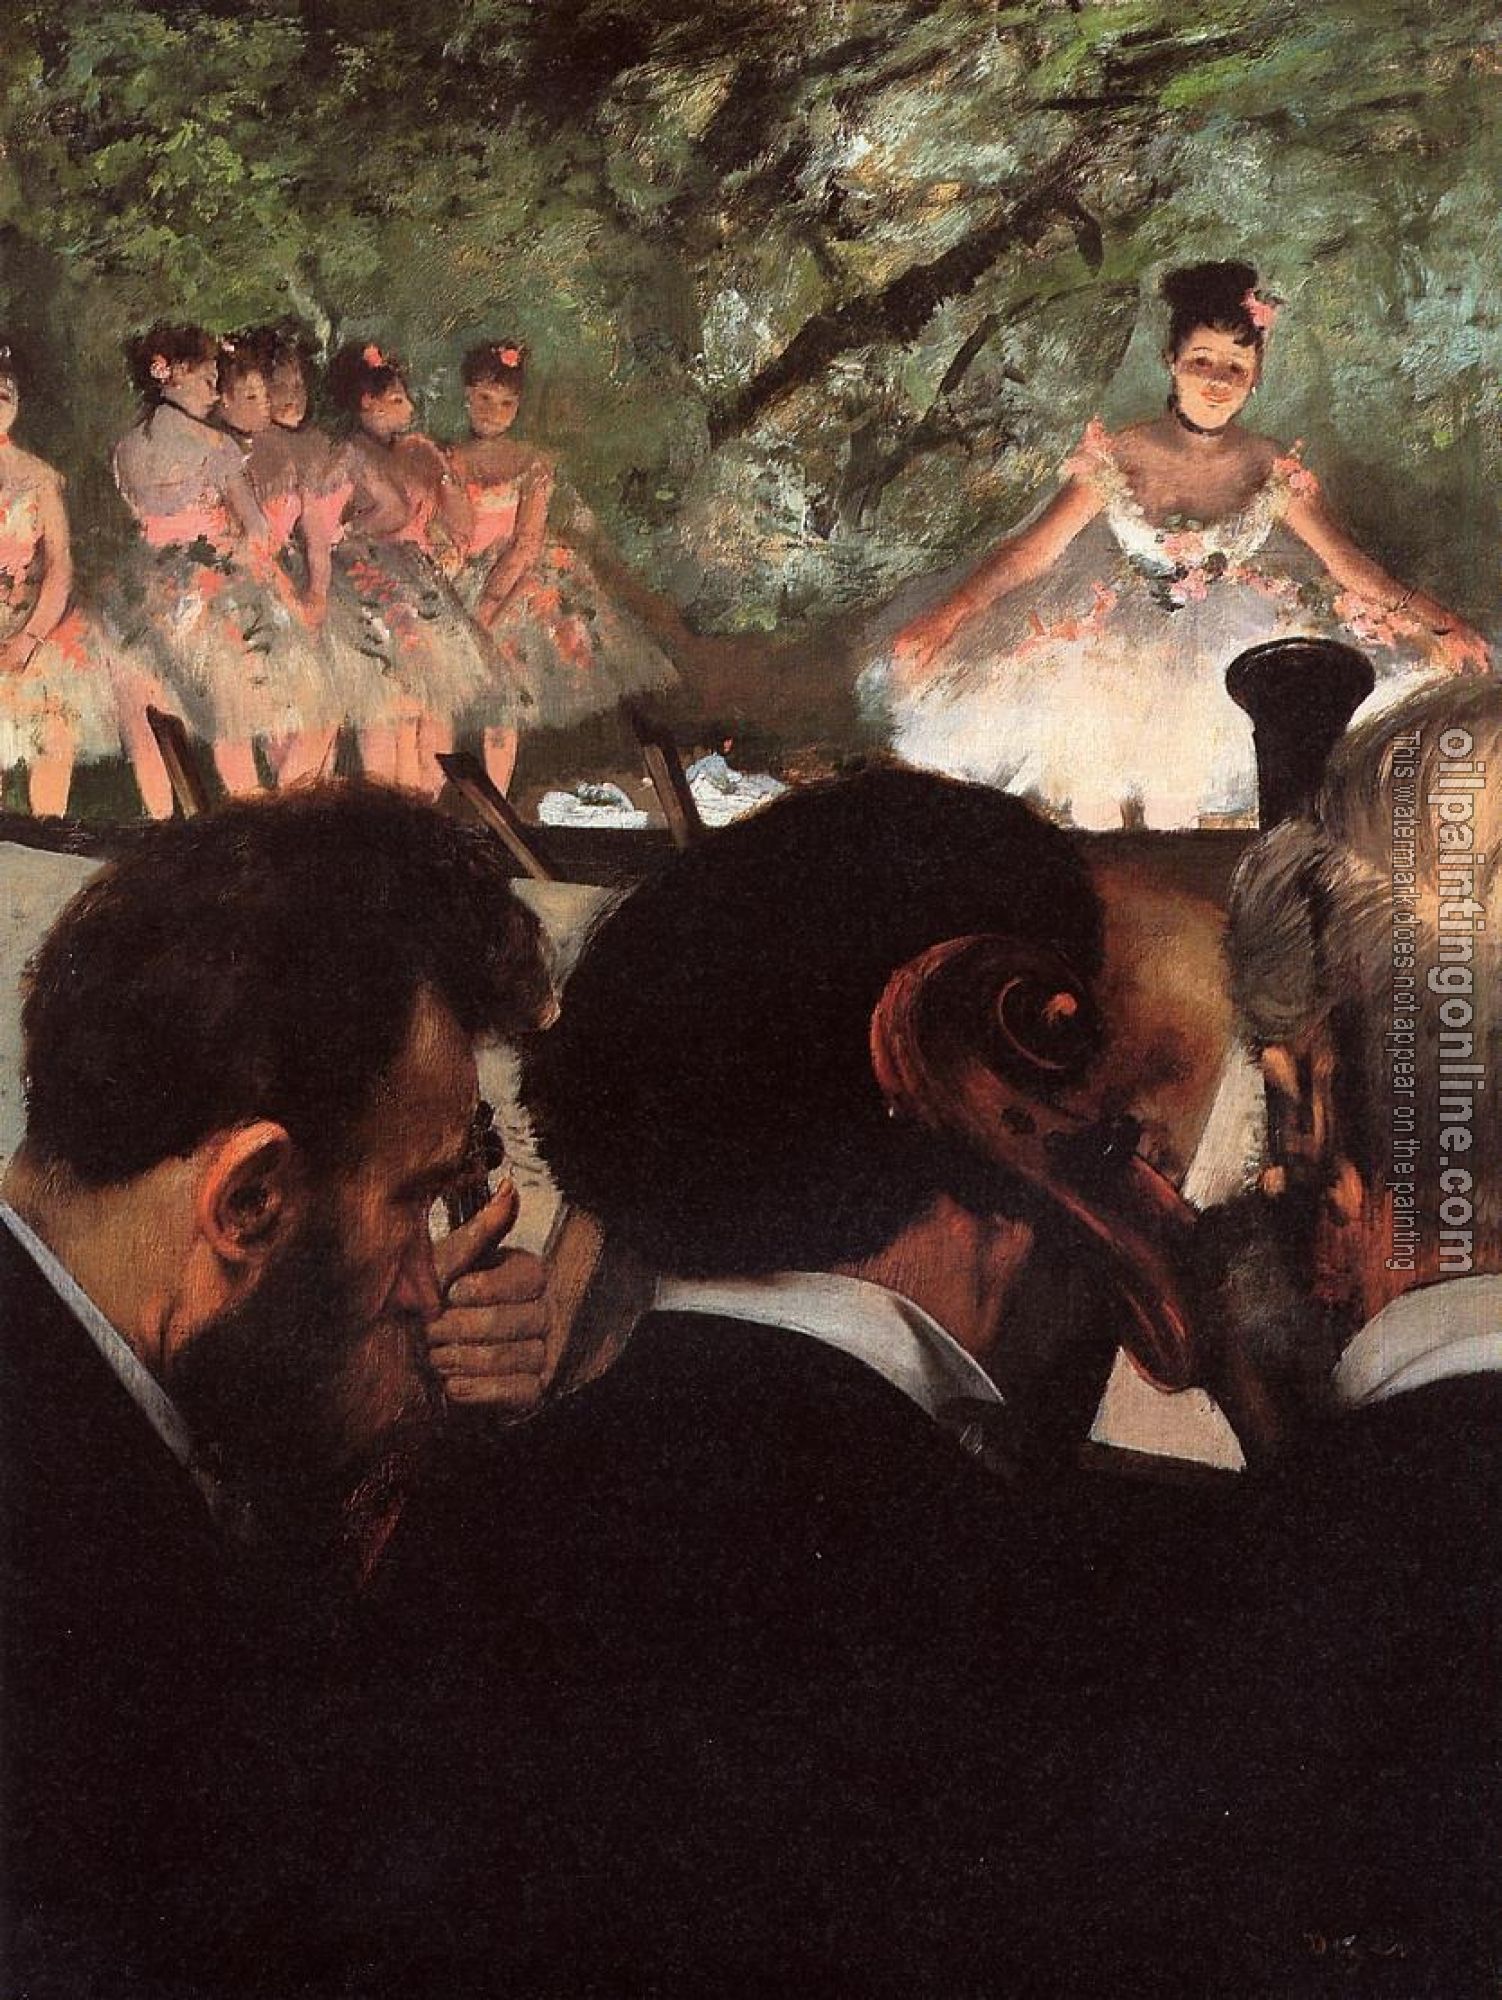 Degas, Edgar - Musicians in the Orchestra